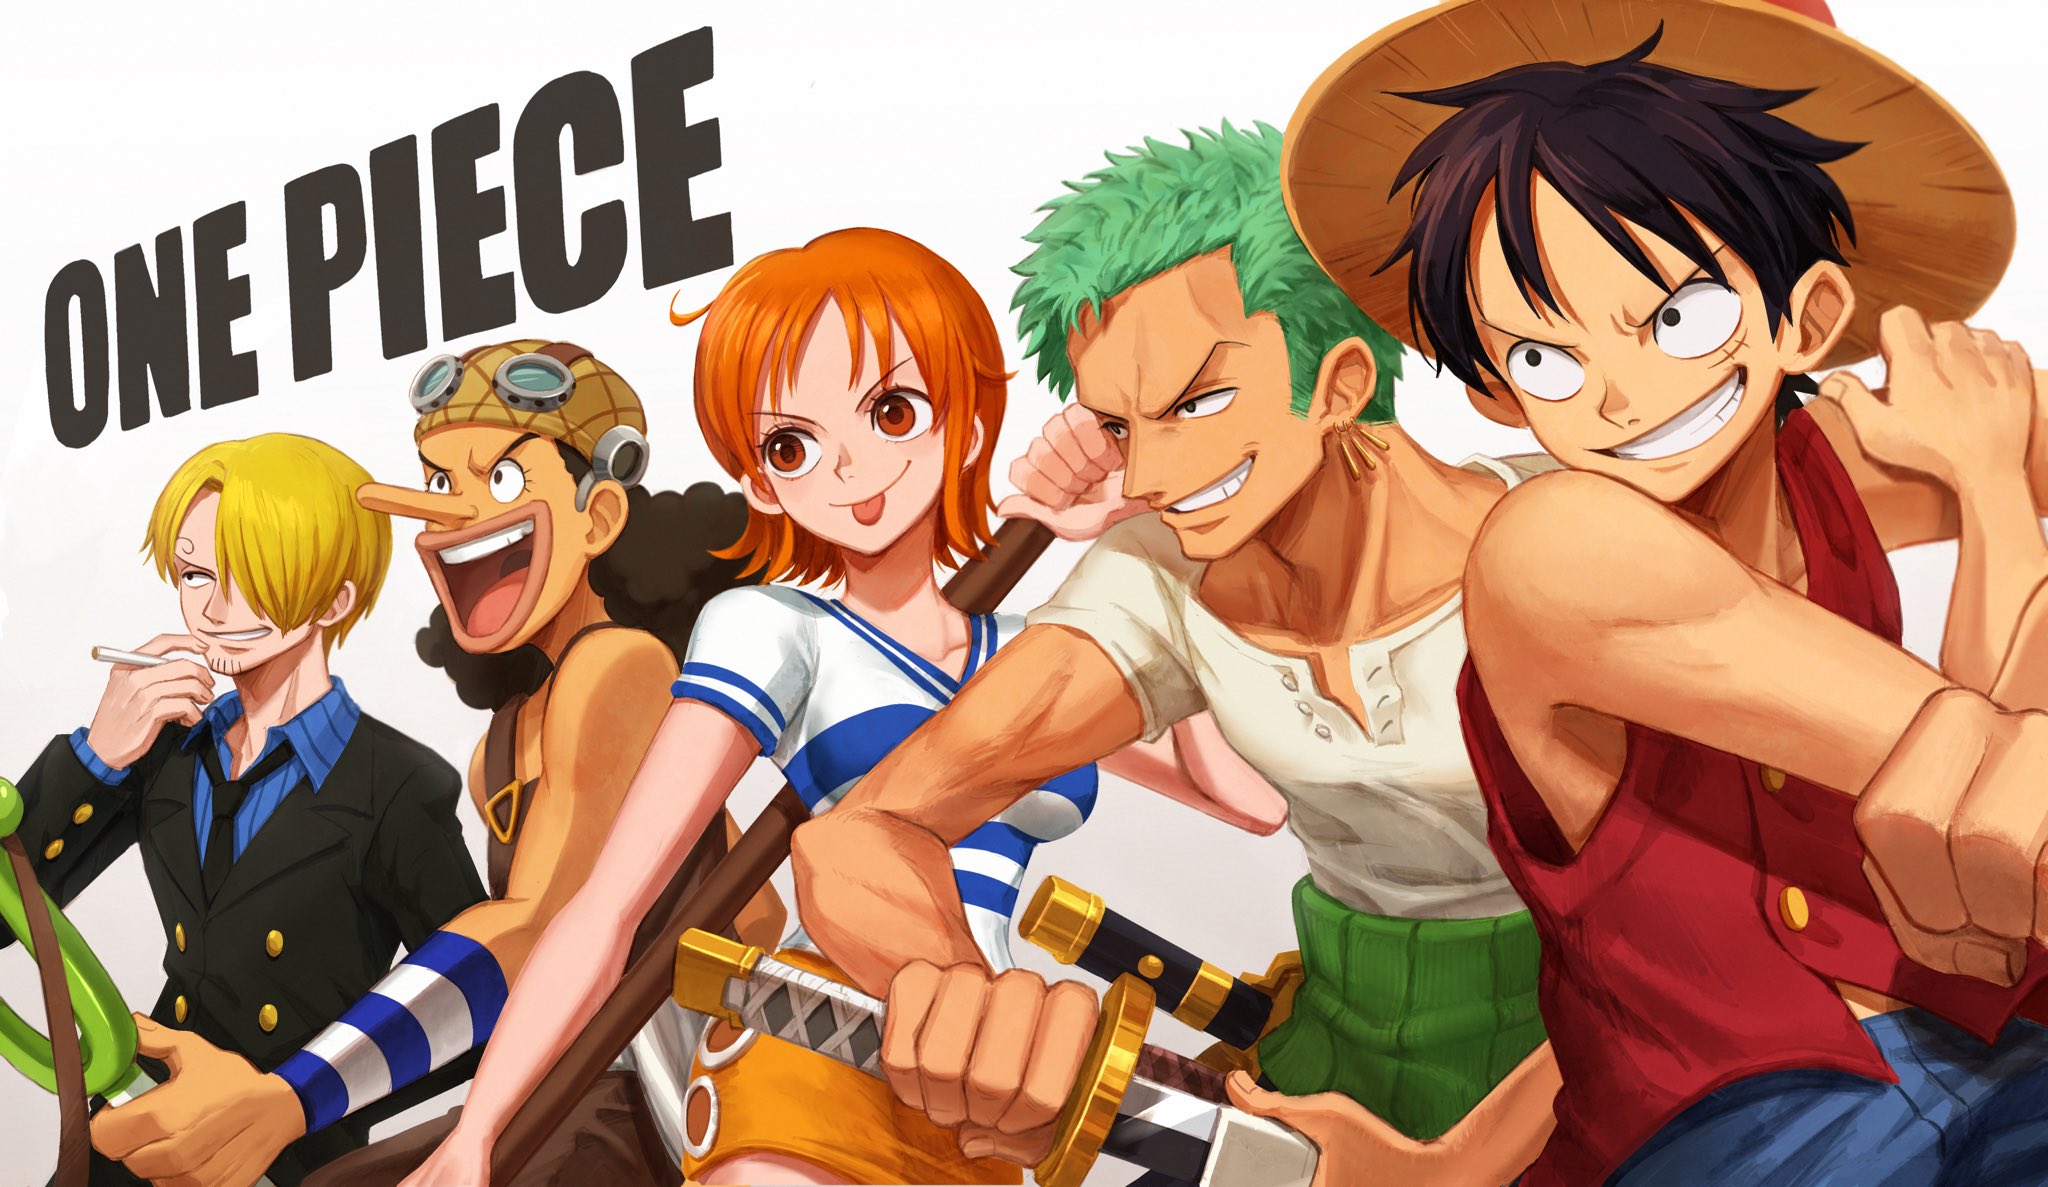 Anime One Piece Hd Wallpaper By Chake